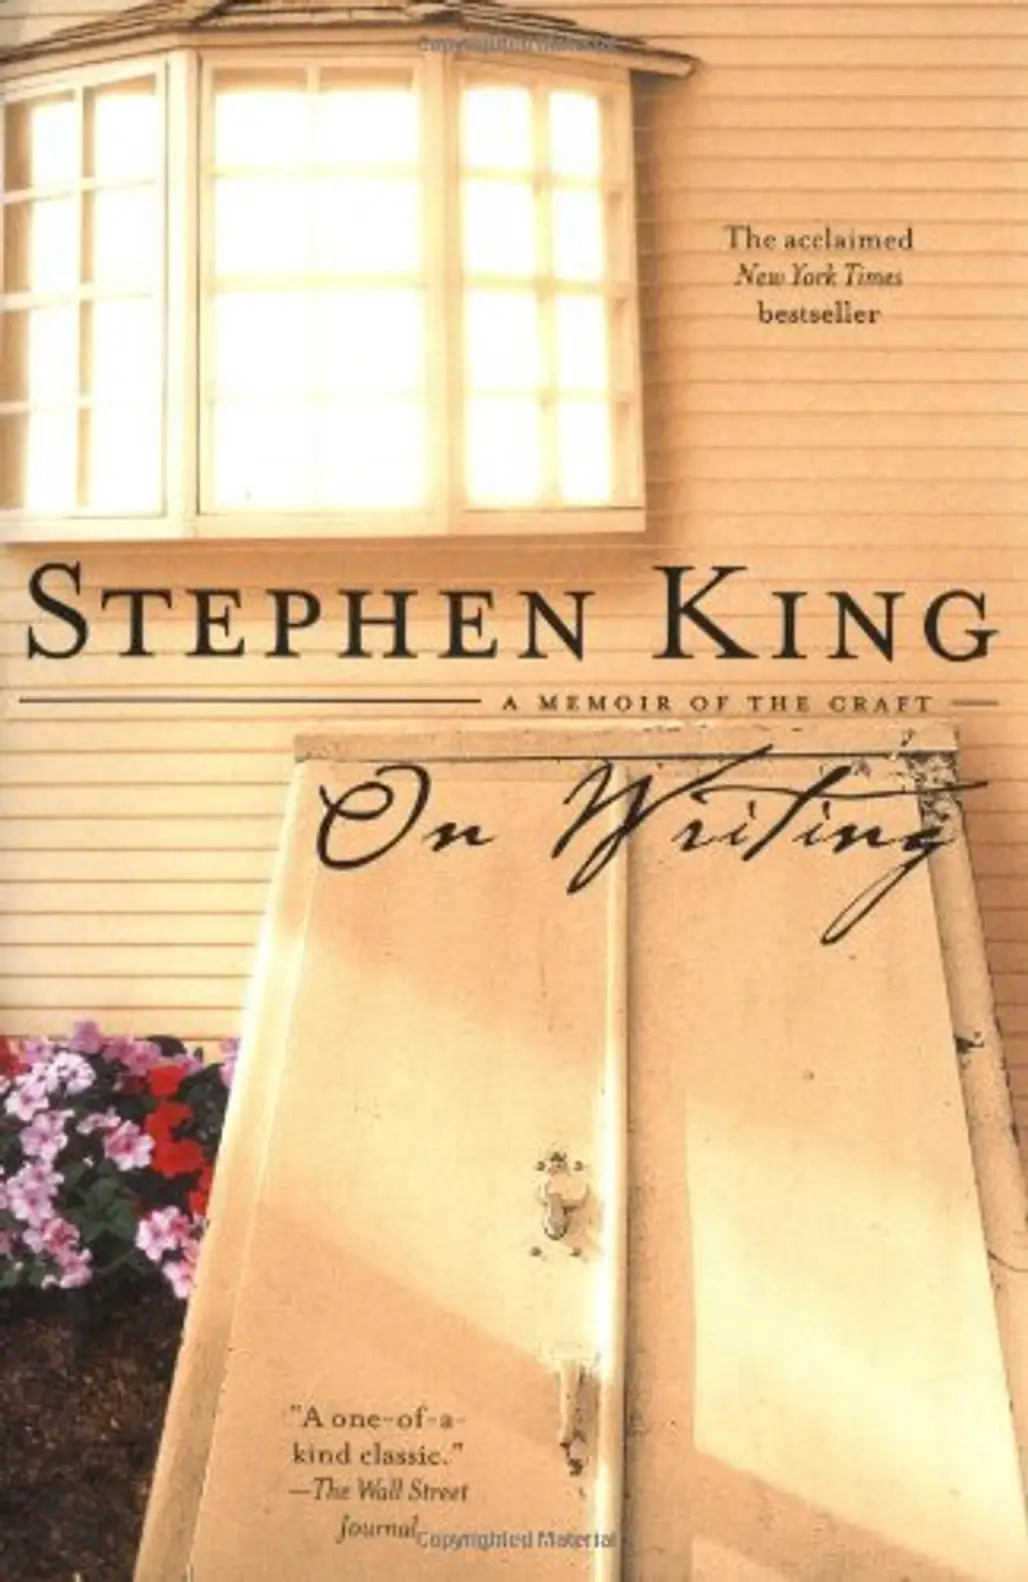 “on Writing” by Stephen King